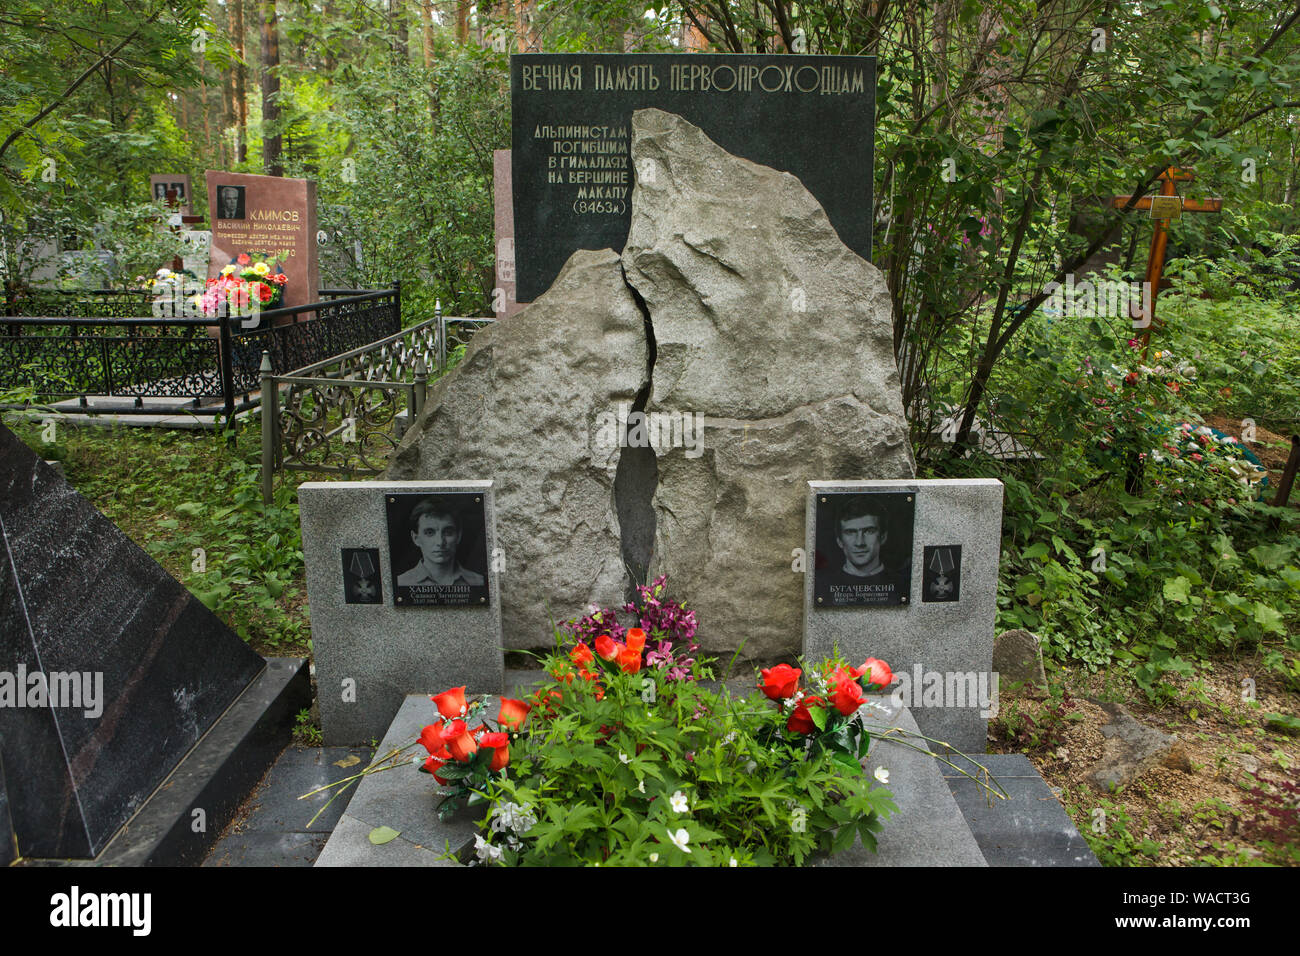 Cenotaph to Russian mountaineers Salavat Khabibullin (1961 - 1997) and Igor Bugachevski (1962 - 1997) who died in the Himalayas at Shirokorechenskoye Cemetery in Yekaterinburg, Russia. They died during the 1997 Russian Makalu Expedition during the successful ascent to the west face of Mount Makalu in Nepal, and their bodies were left on the mount. Stock Photo